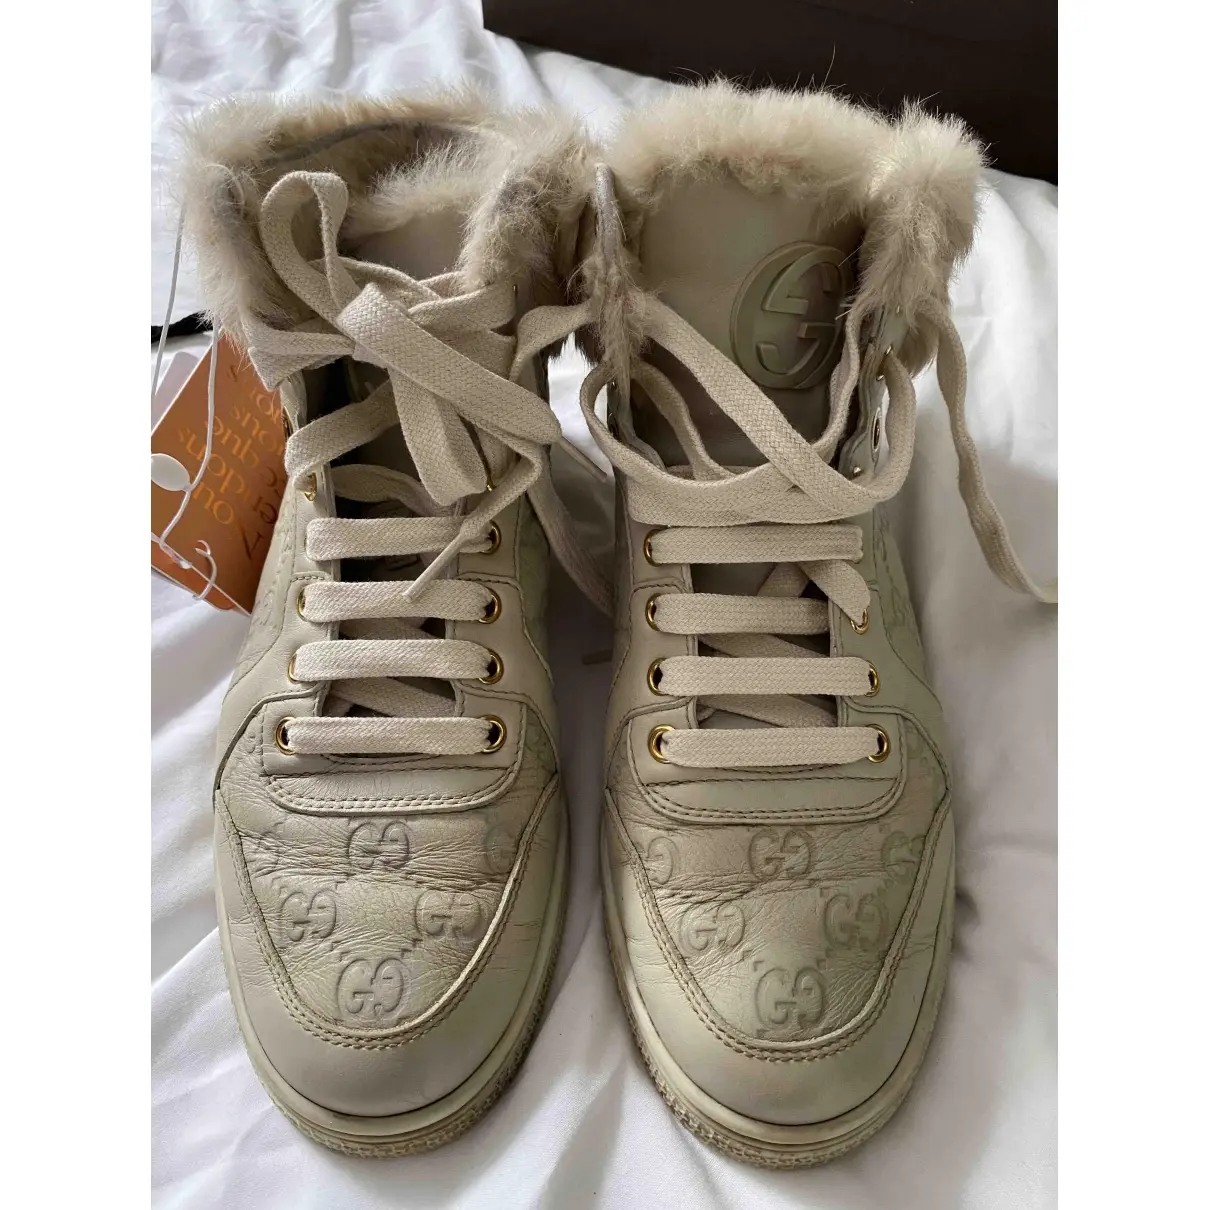 Gucci FlashTrek HighTop leather trainers for sale